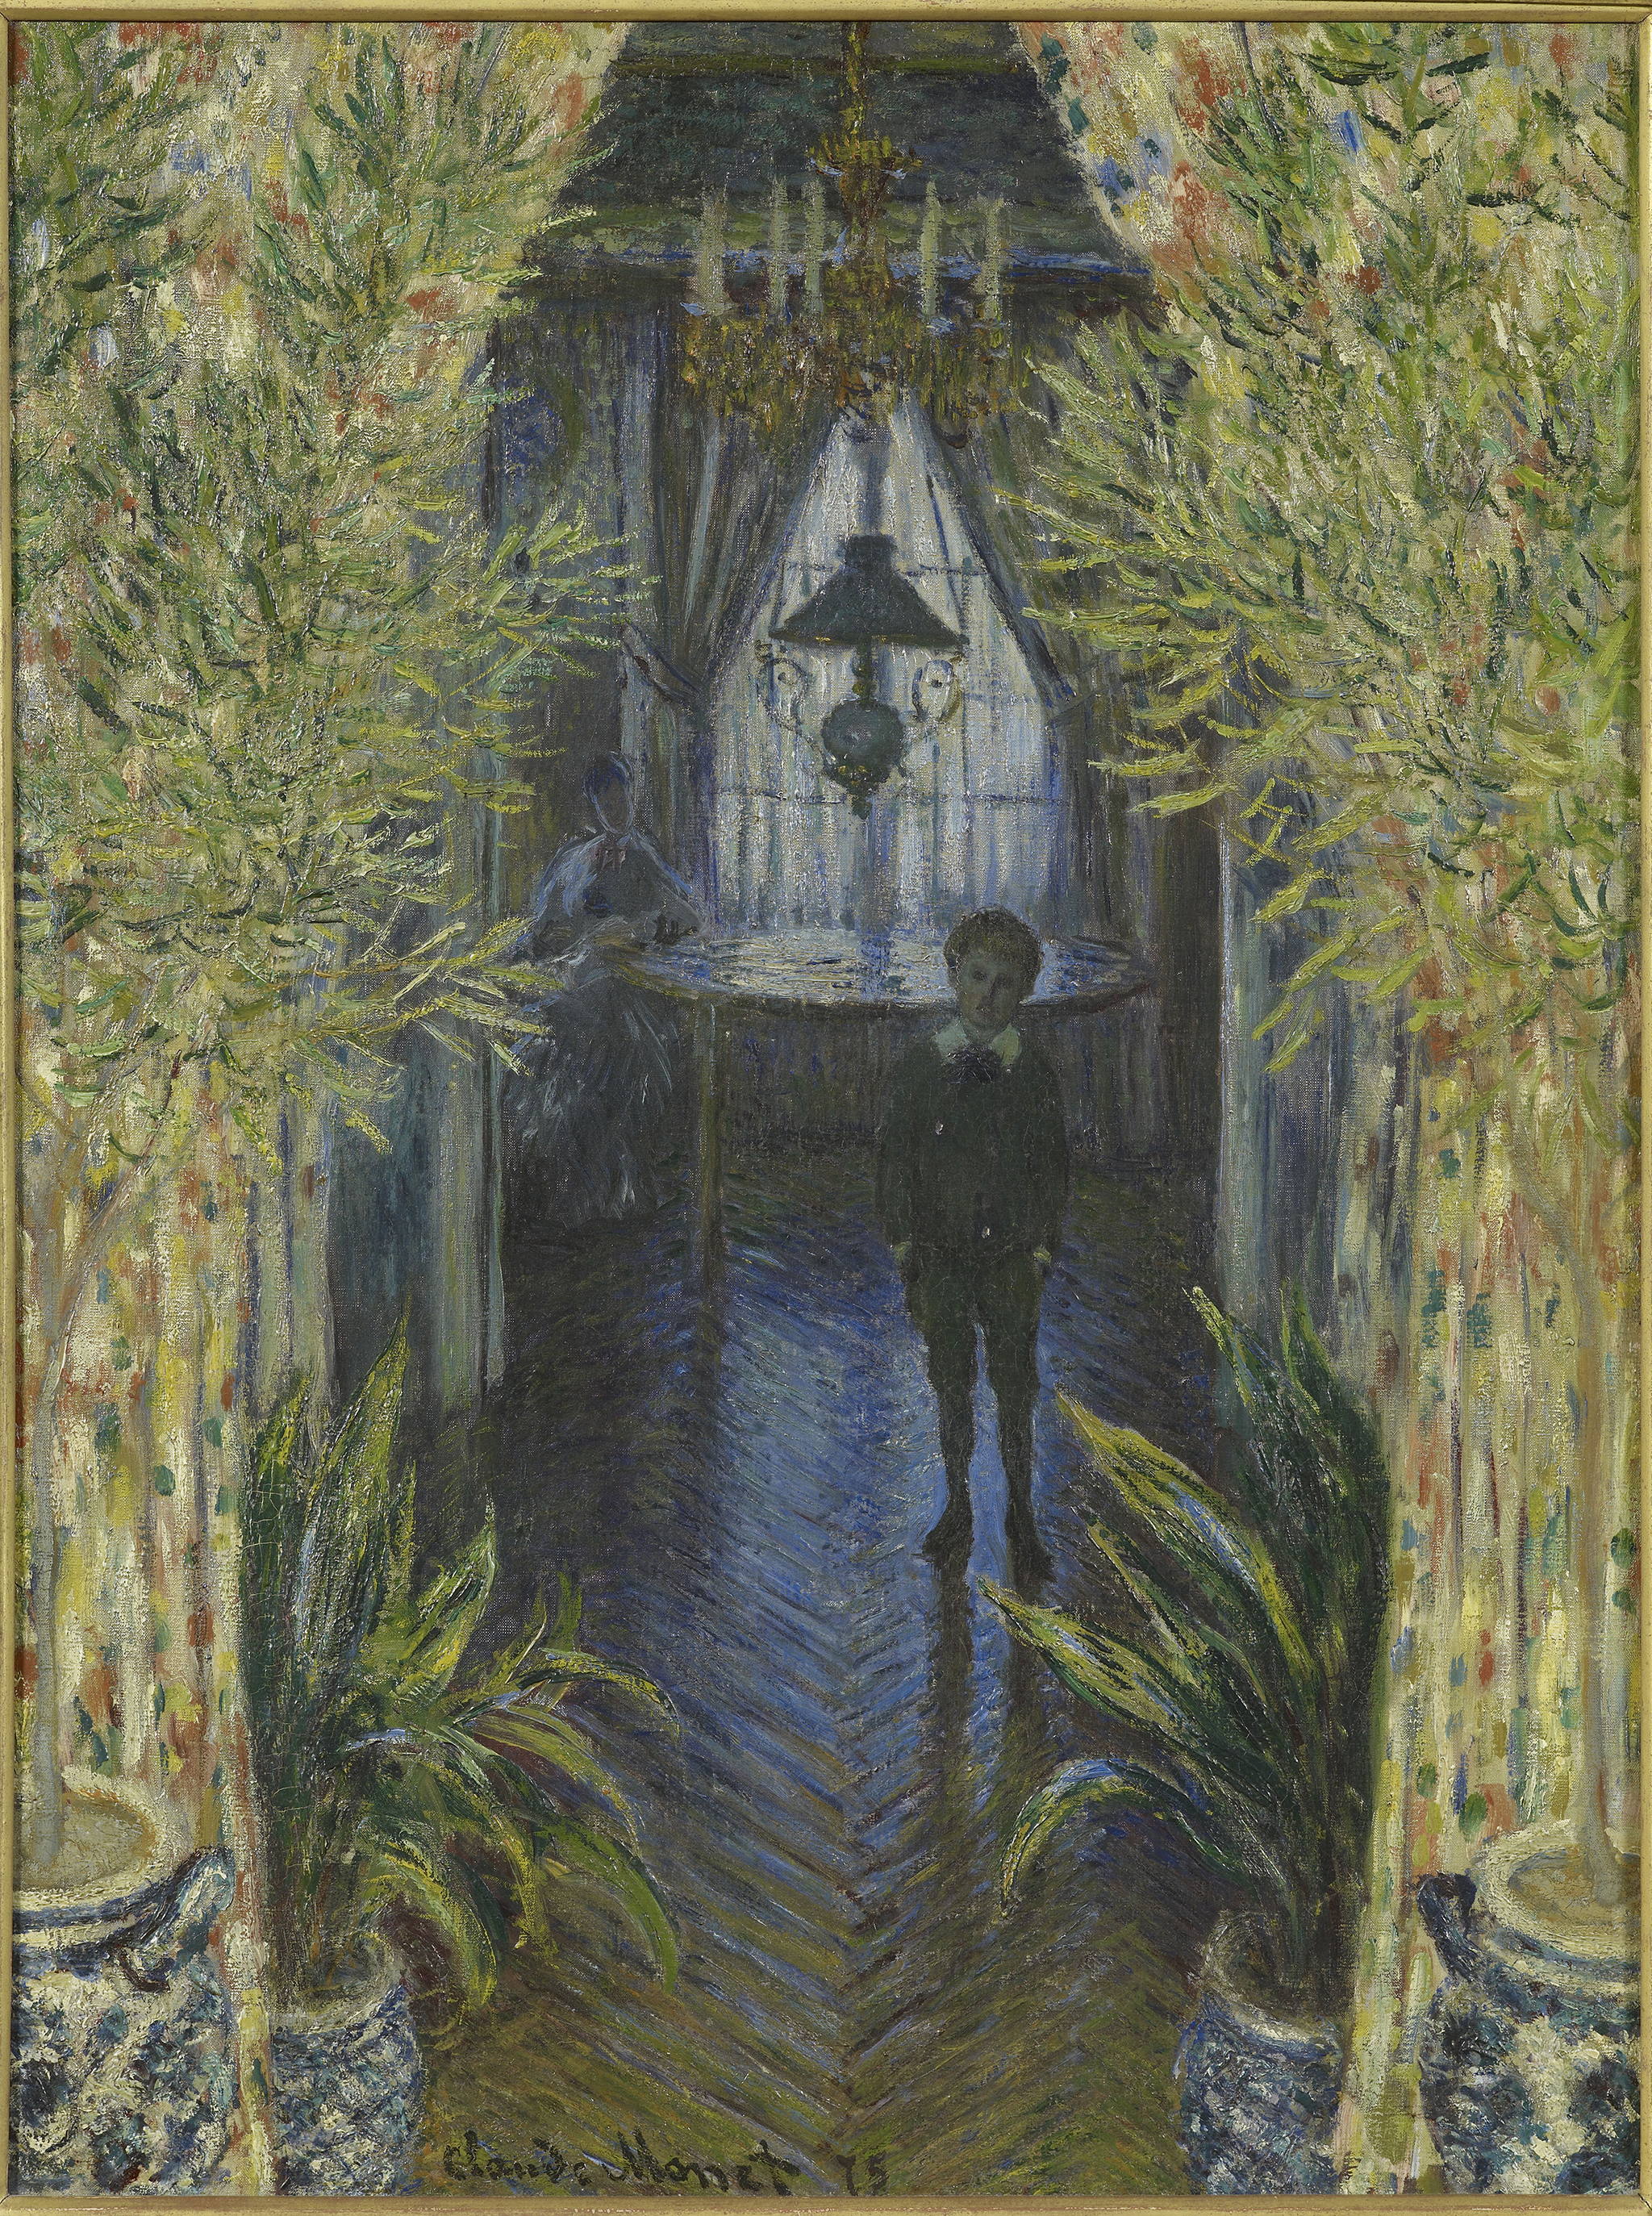 A painting depicting a young boy standing on a wooden floor in a dark blue hallway under a gold chandelier. To the sides of the painting have green plants sprouting out from blue and white vases. In the background there is a woman sitting at a circle table under a large window.